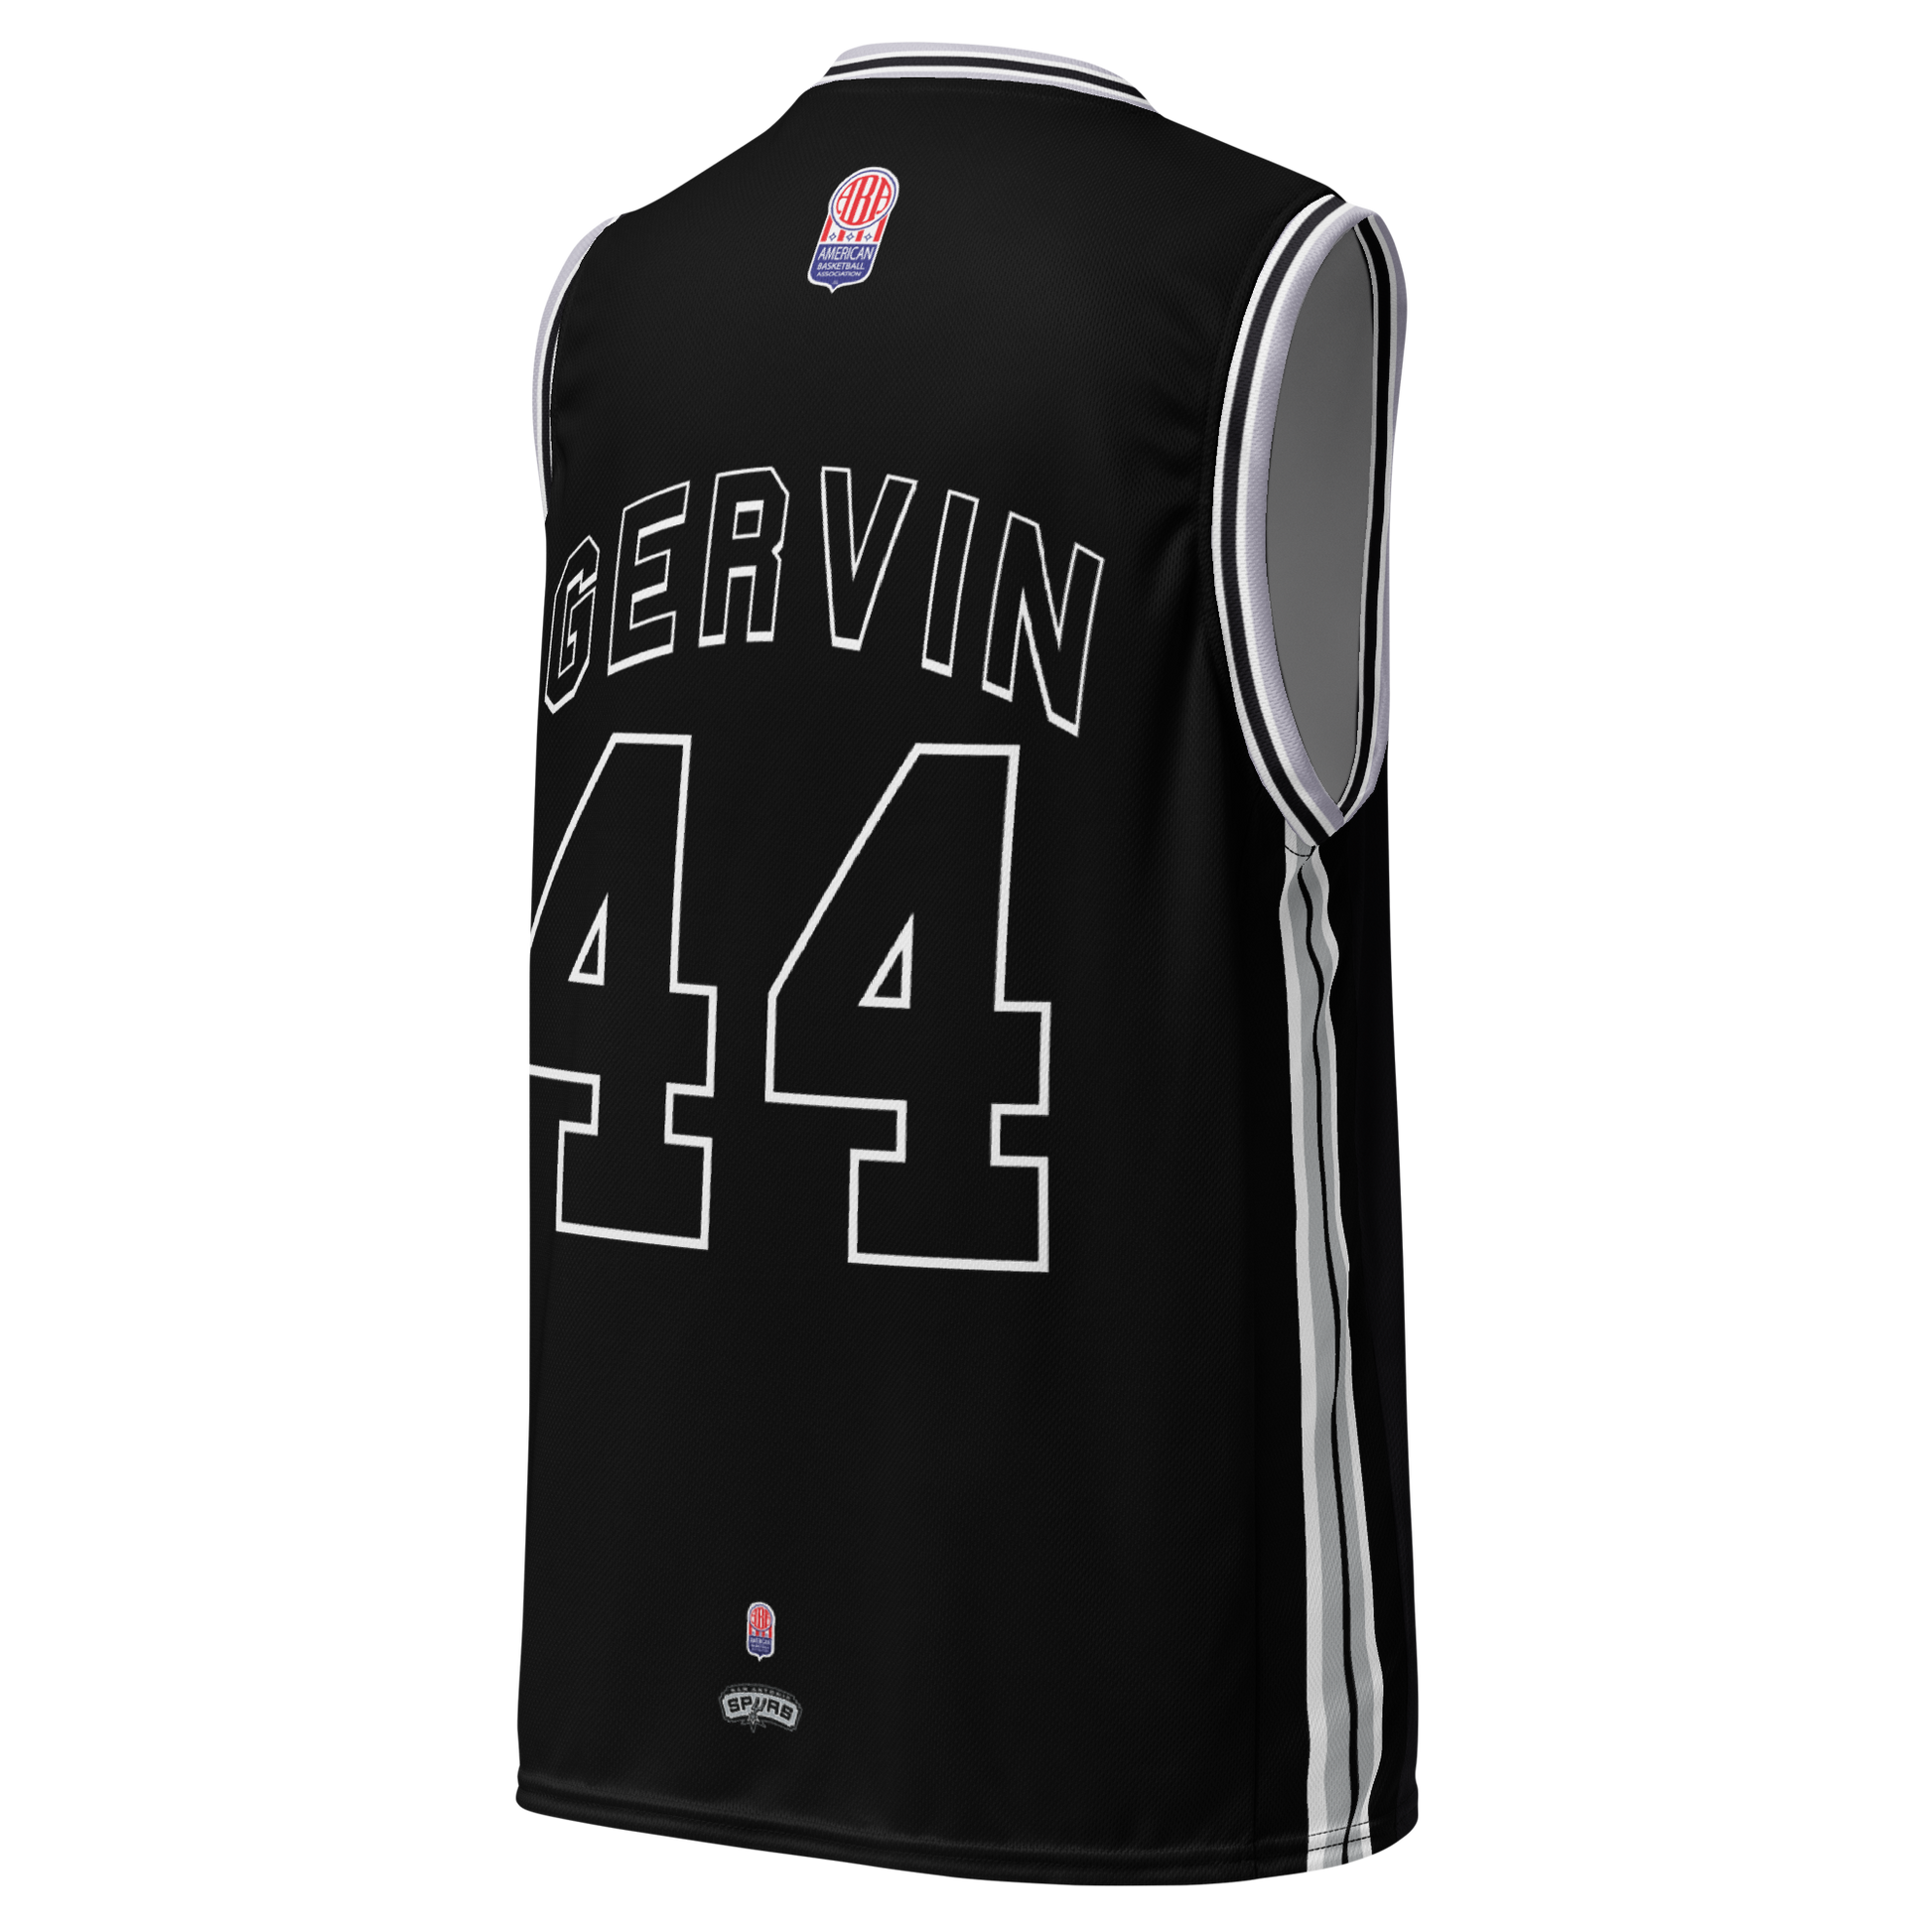 george gervin jersey products for sale